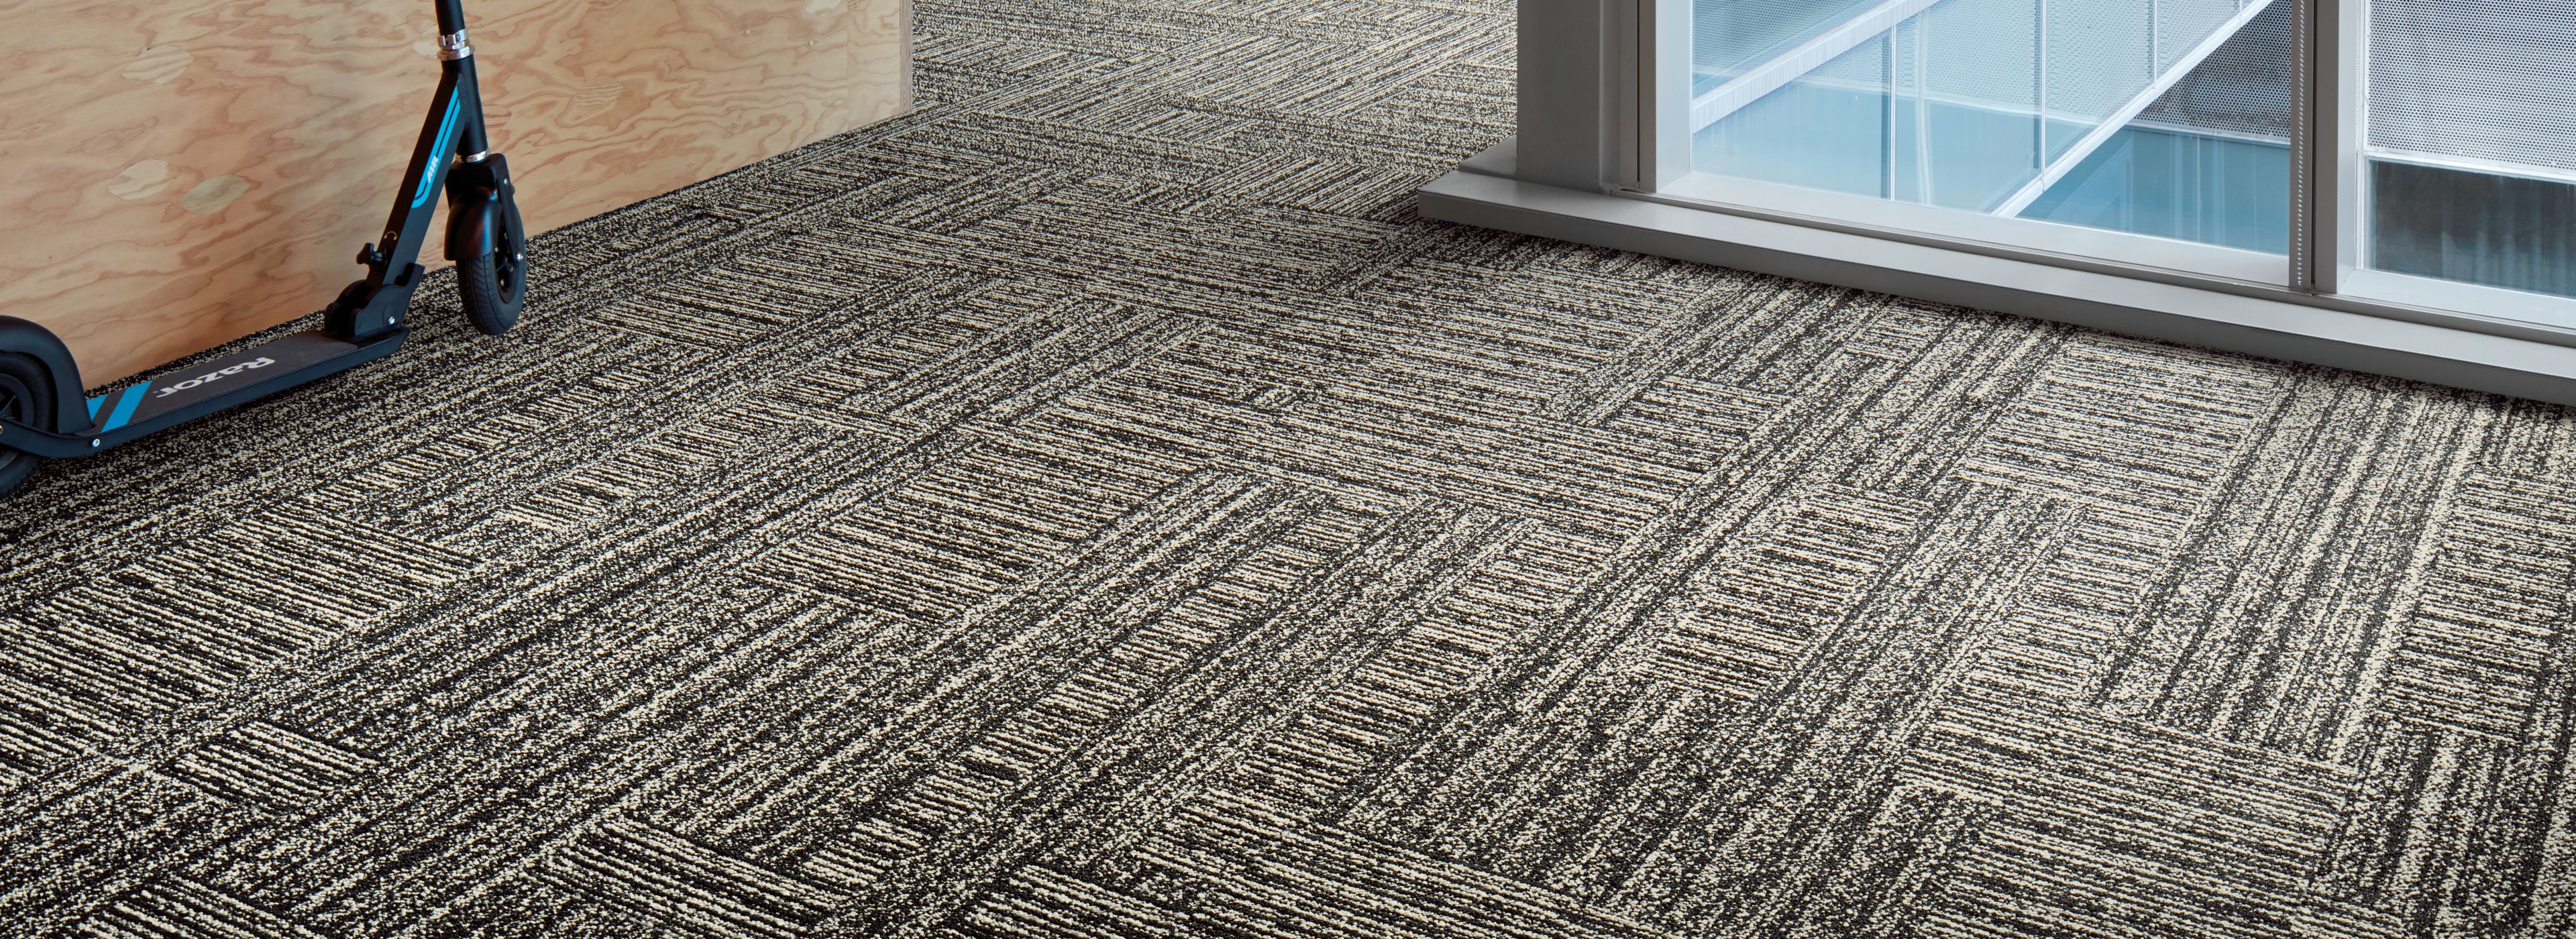 Interface Decibel and Hard Drive plank carpet tile in small area with glass windows imagen número 1